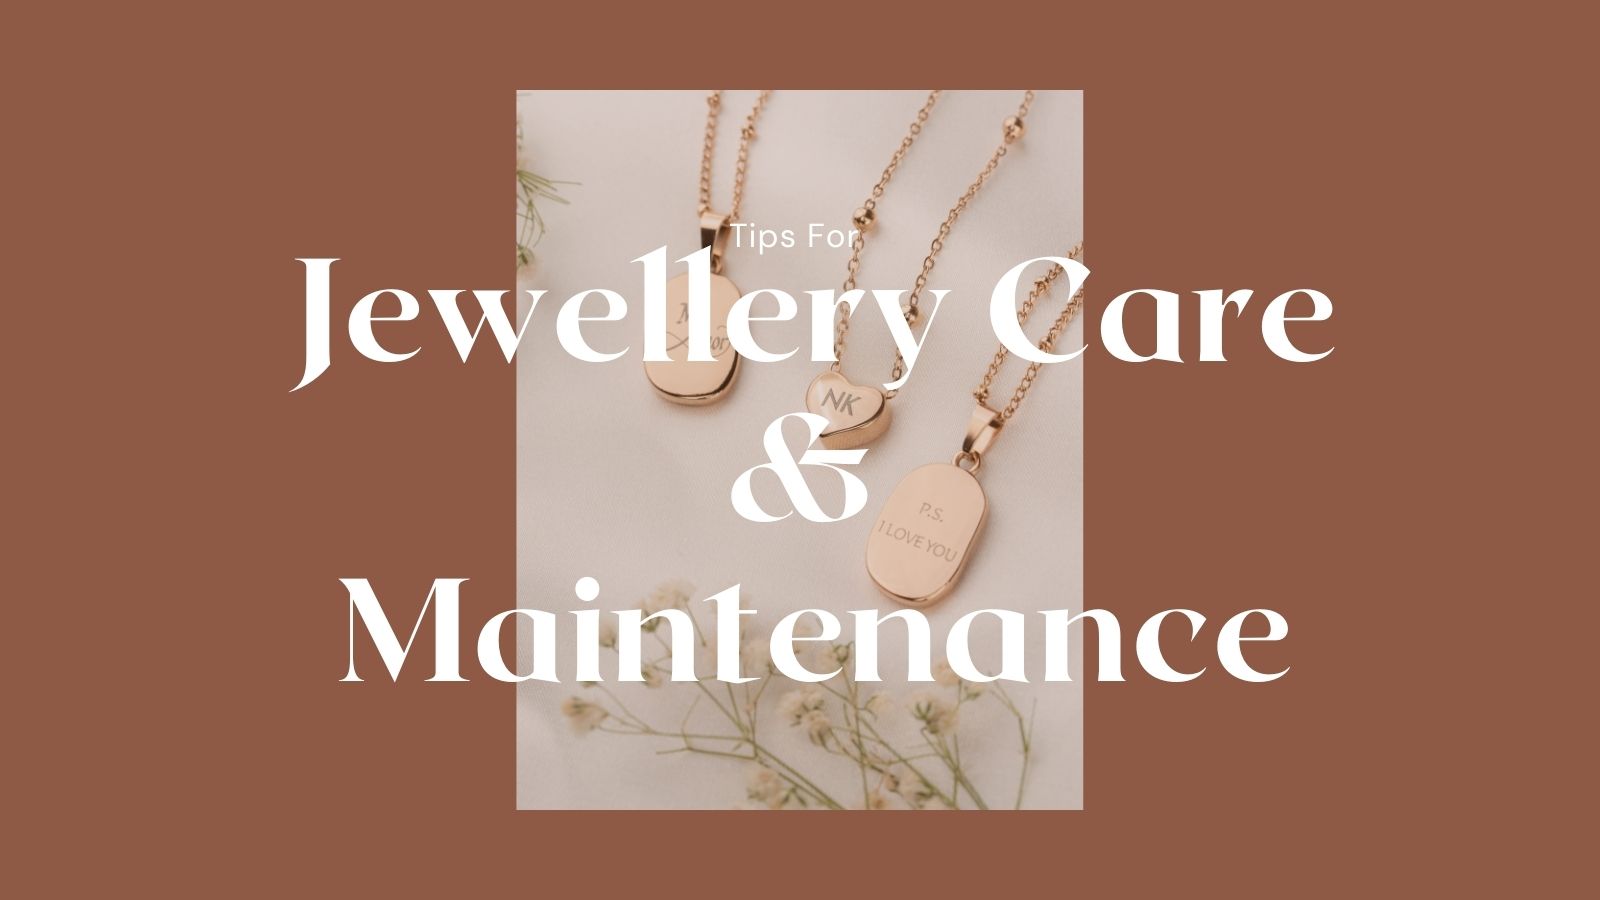 Jewellery care and maintence